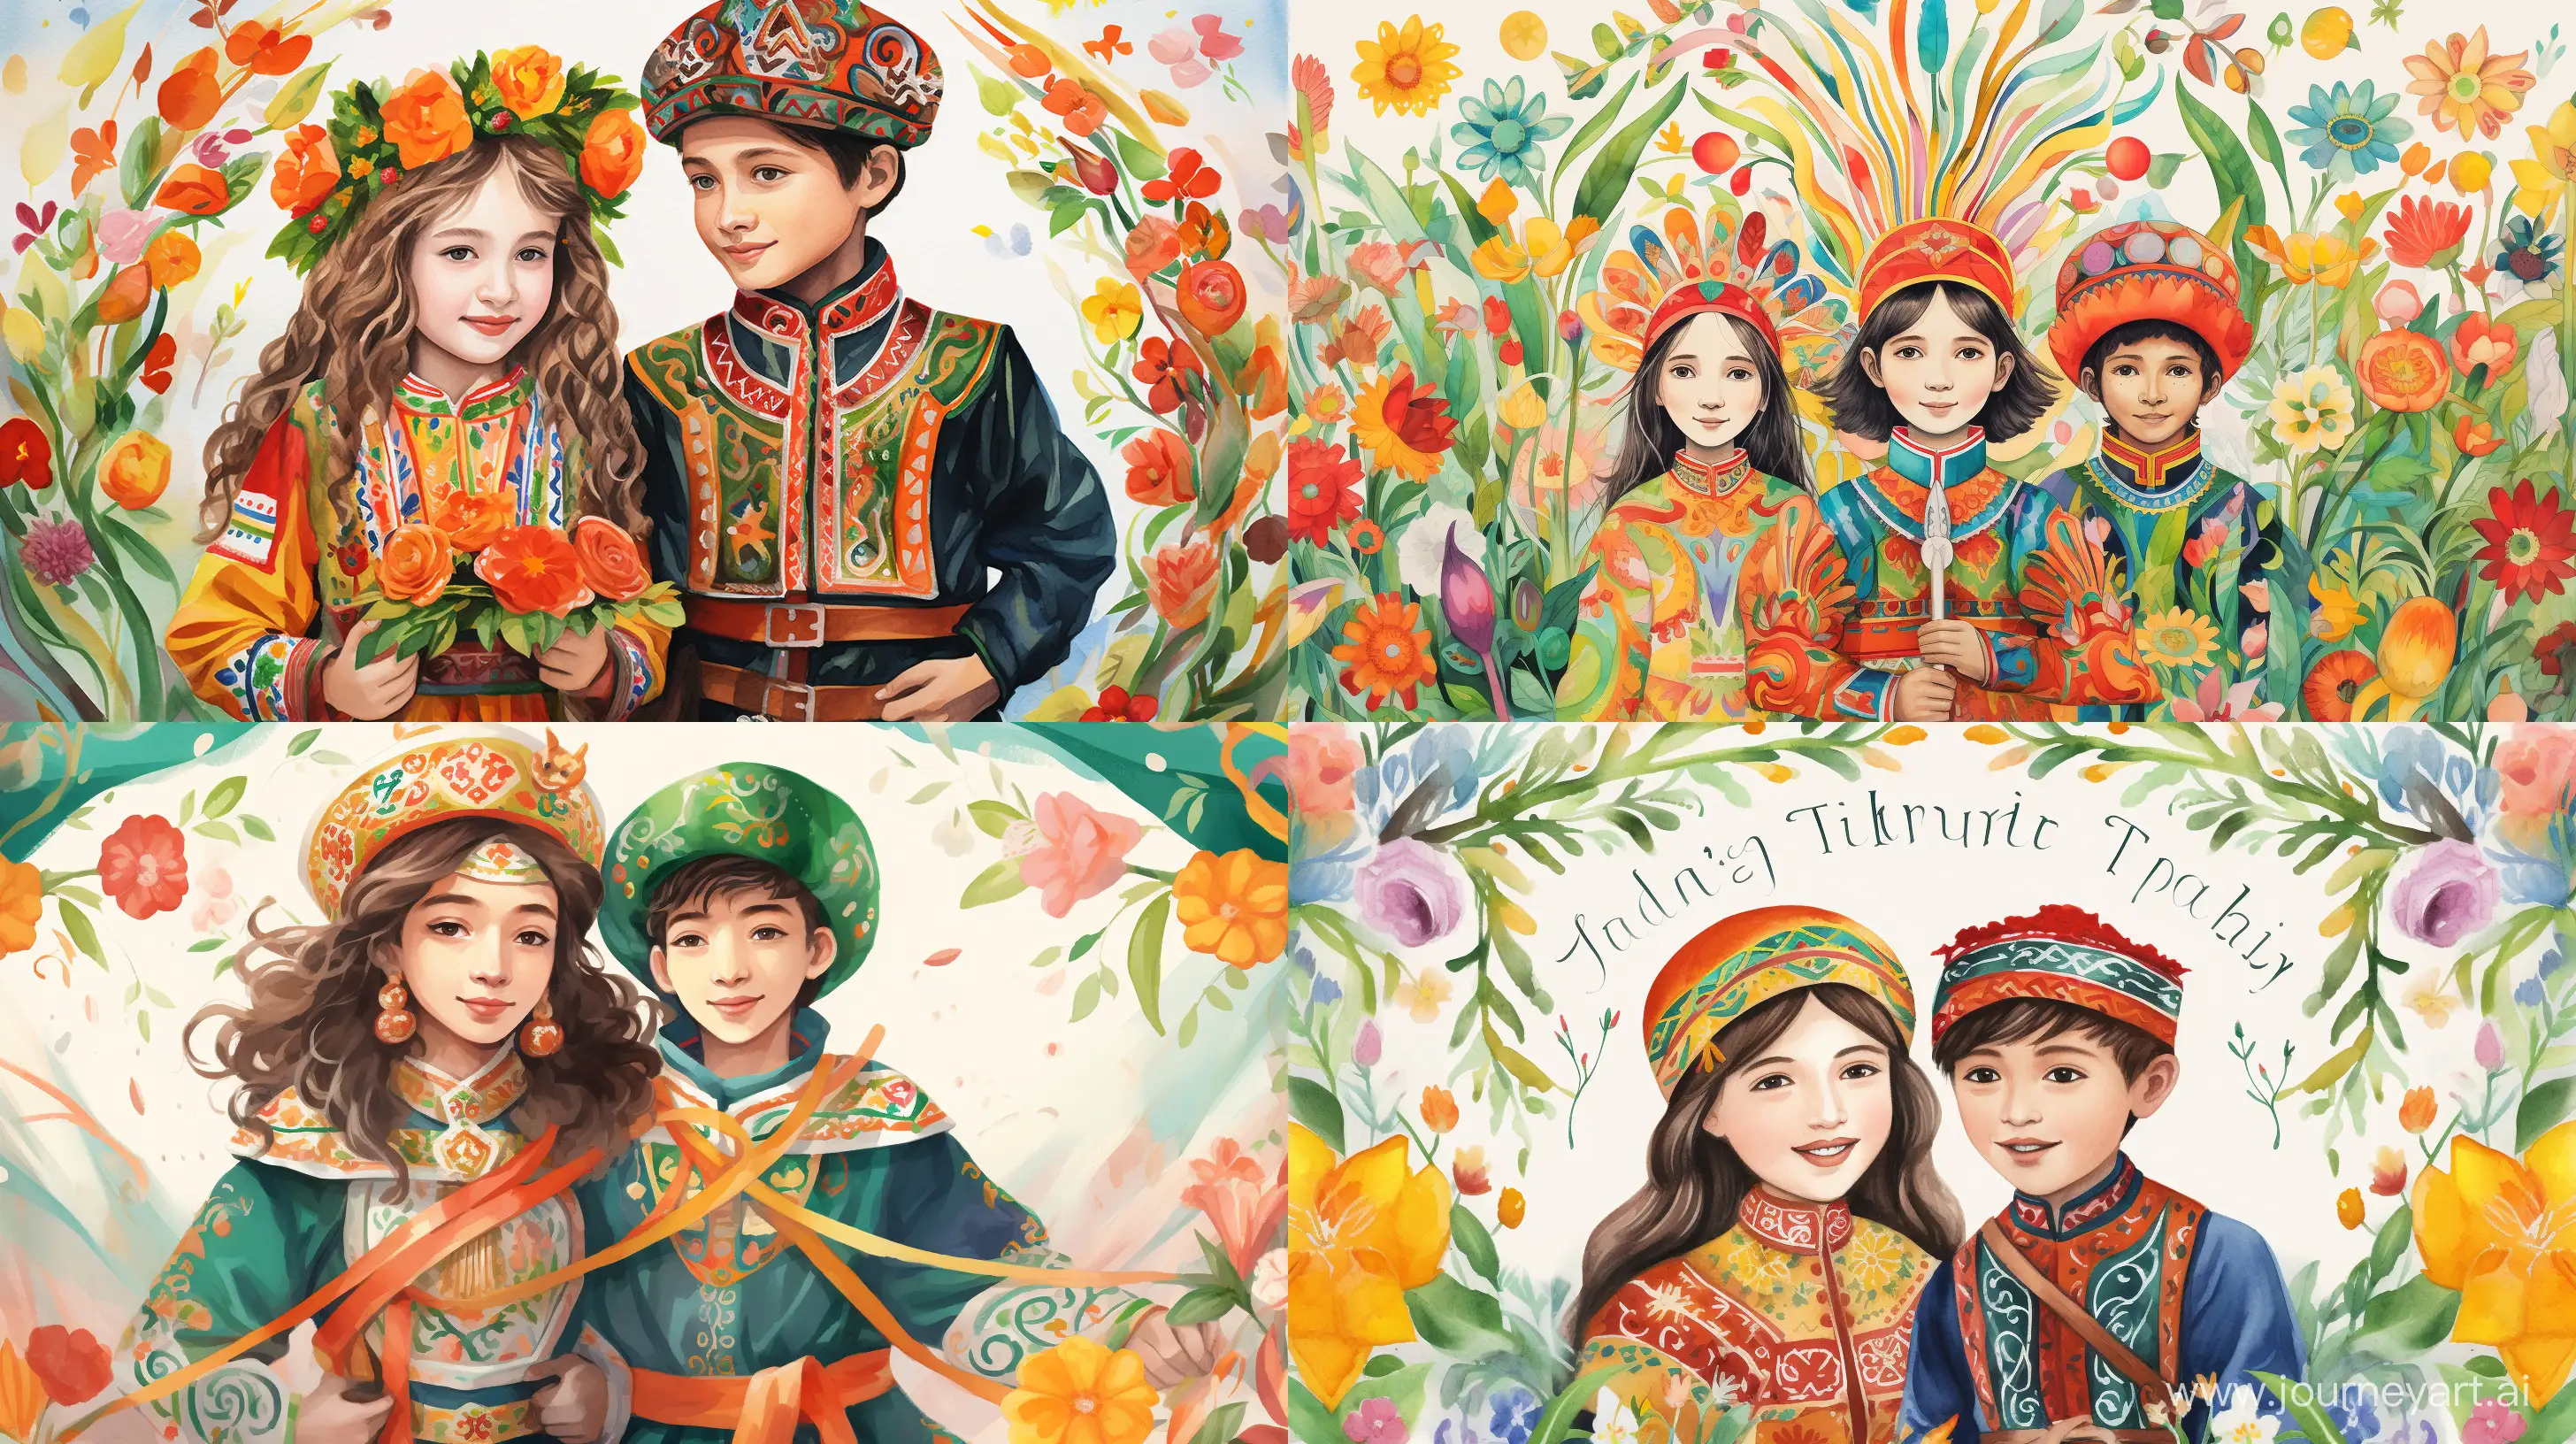 A lively Instagram post for a children's school celebrating the Amazigh New Year 2974, featuring joyful children wearing traditional Amazigh clothing, holding colorful banners with Amazigh symbols, surrounded by vibrant flowers and greenery, Illustration, watercolor painting, --ar 16:9